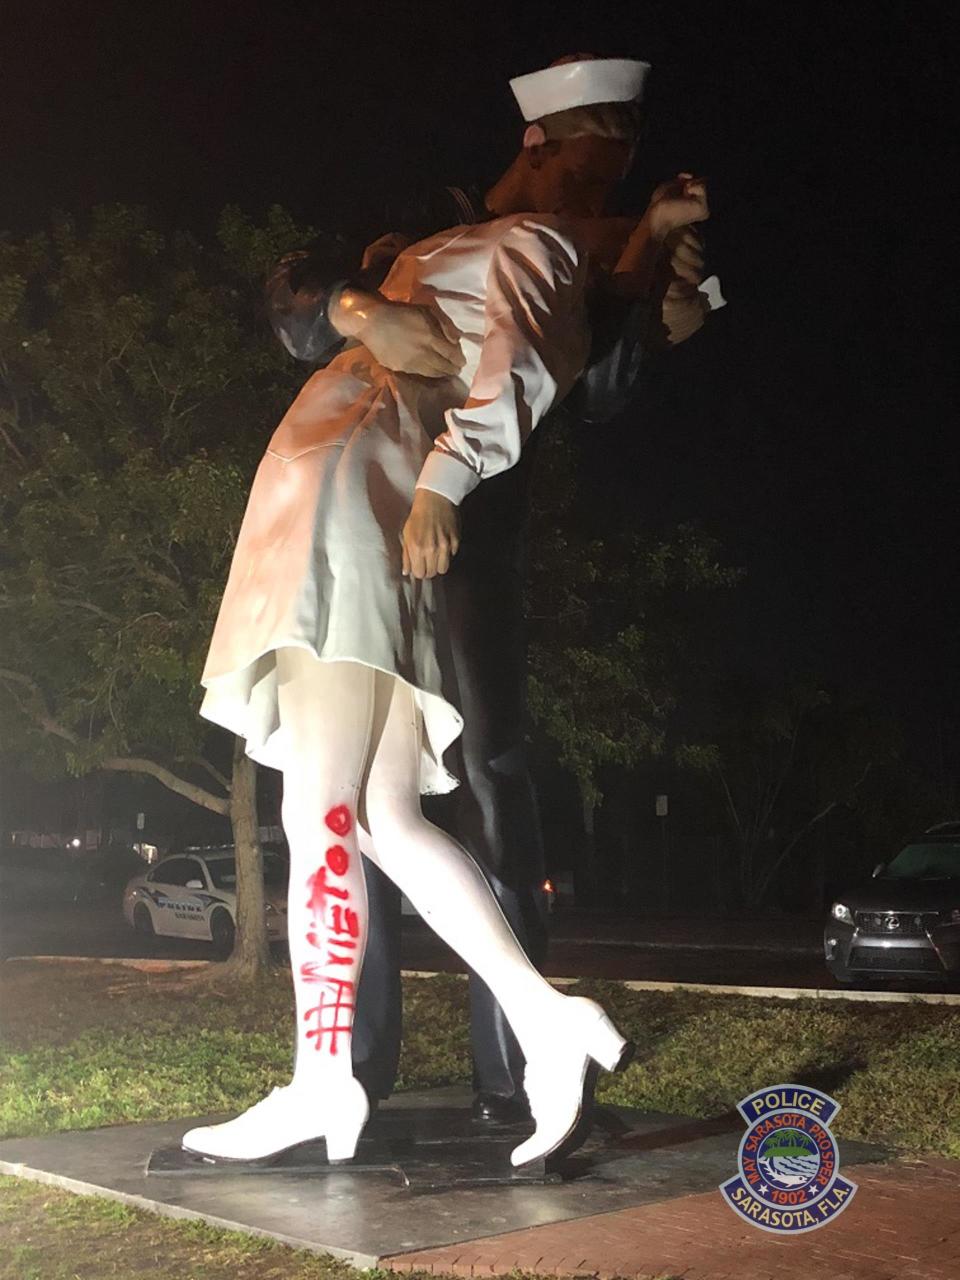 The statue, called Unconditional Surrender, was found spraypainted with the "MeToo" hashtag early Tuesday morning, police said. (Photo: Sarasota PD)